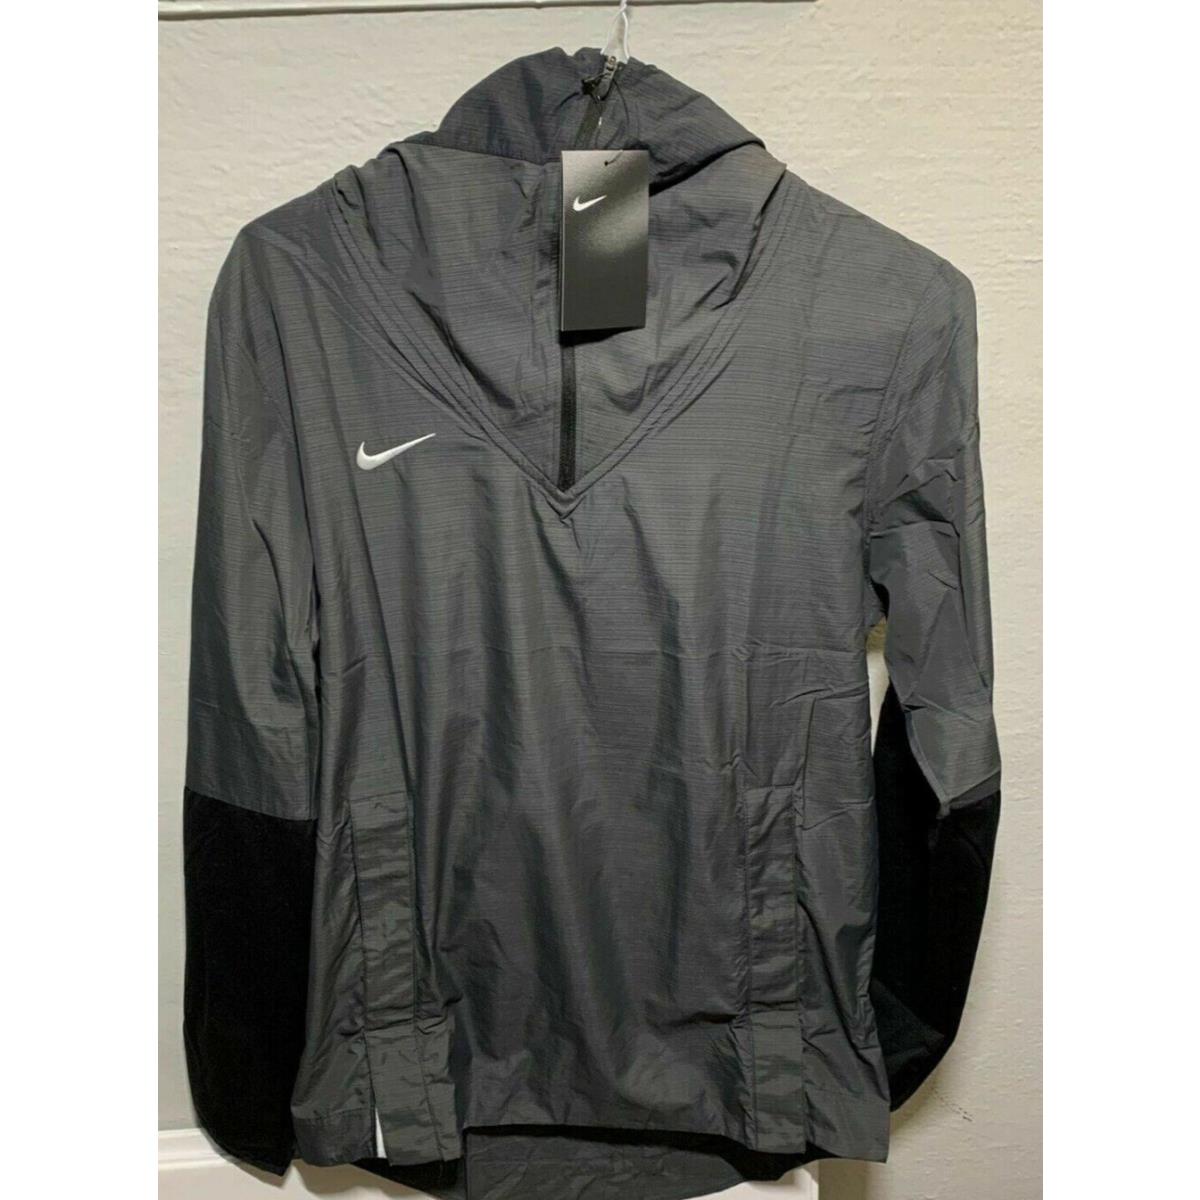 Nike Activewear Lightweight Player Jacket Black Silver CI4477 060 Small